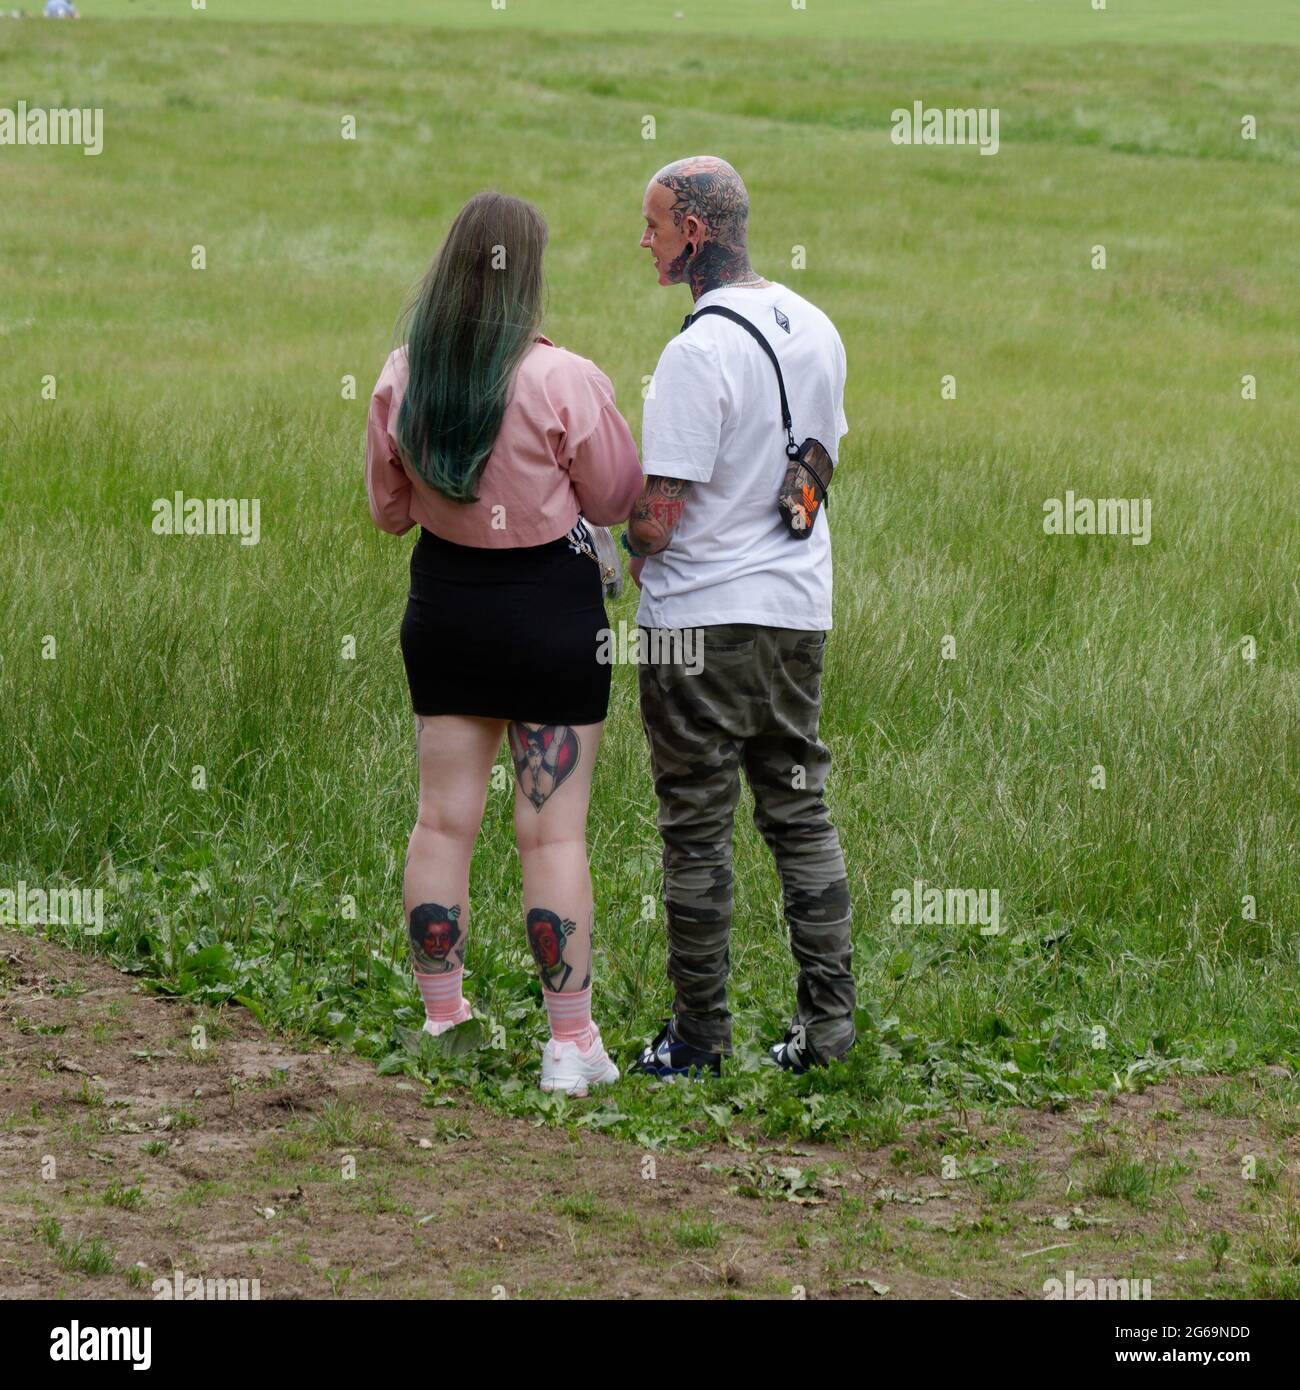 London, Greater London, England - June 26 2021: Couple with leg and or head tattoo's. Stock Photo